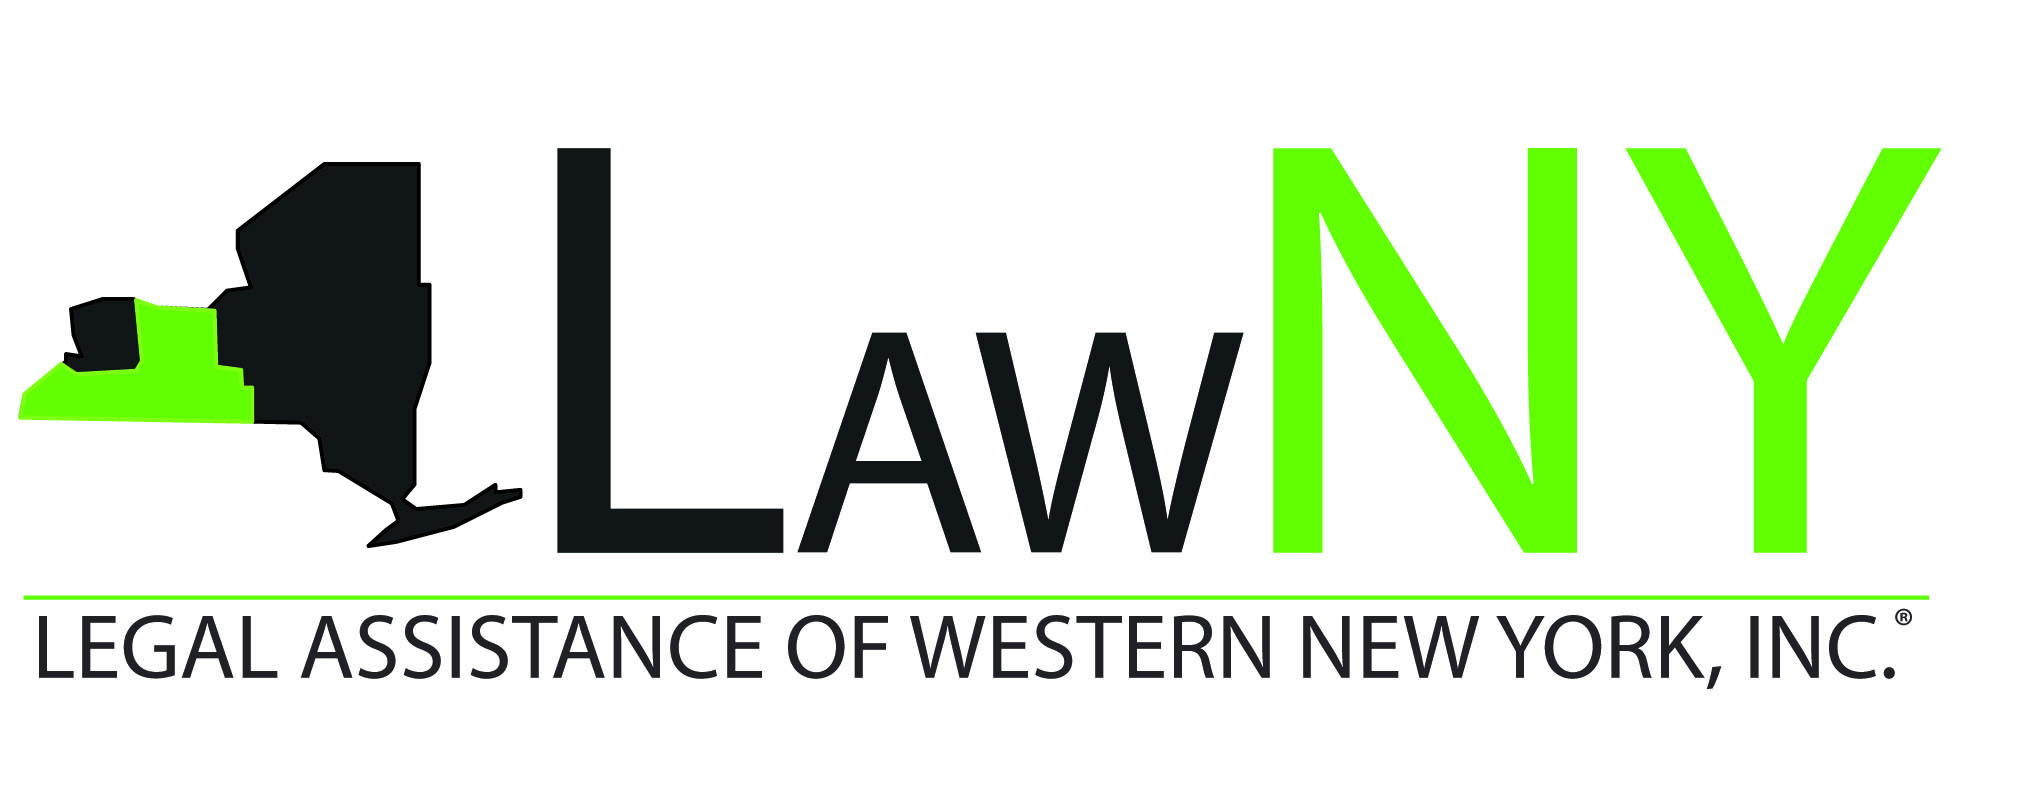 Legal Assistance of Western New York, Inc. (LawNY)